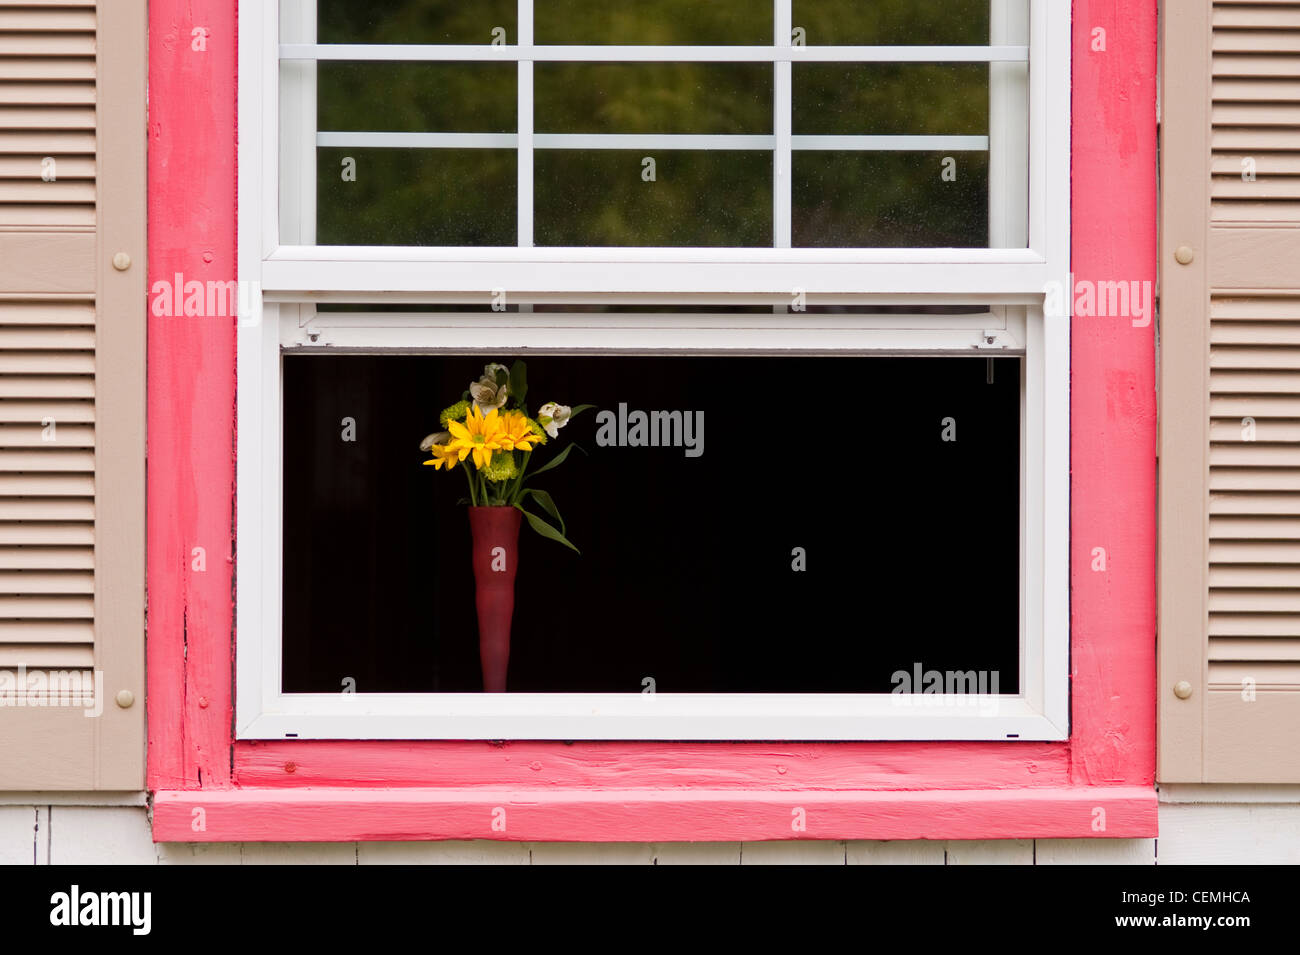 Open window with yellow and green flowers in vase with window shutters and pink window trim Stock Photo